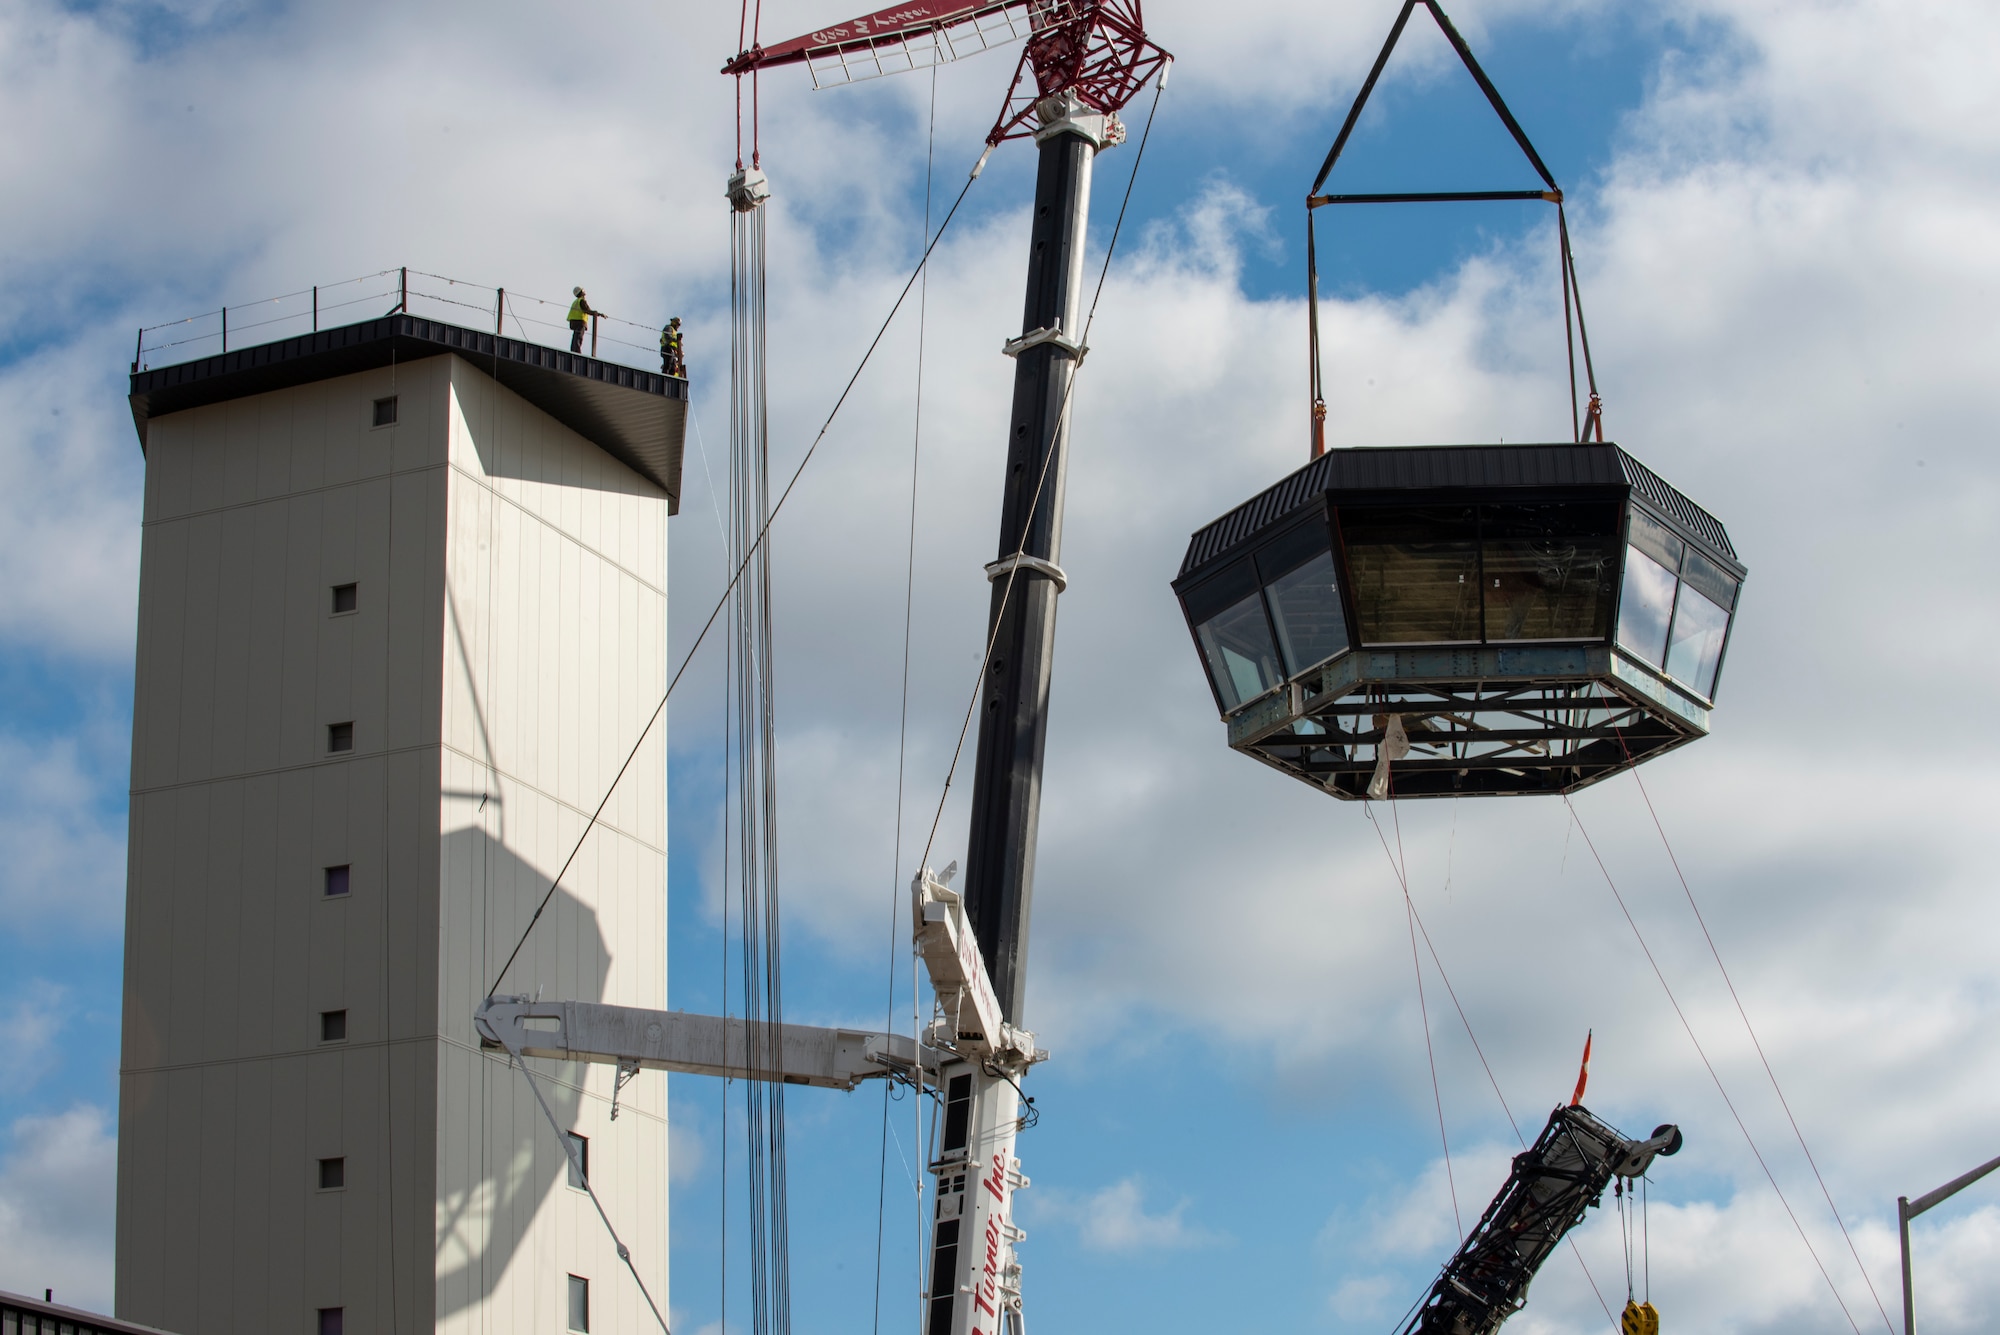 The control cab is hoisted in the air by a crane to be placed atop of the new air traffic control tower at Seymour Johnson Air Force Base, North Carolina.